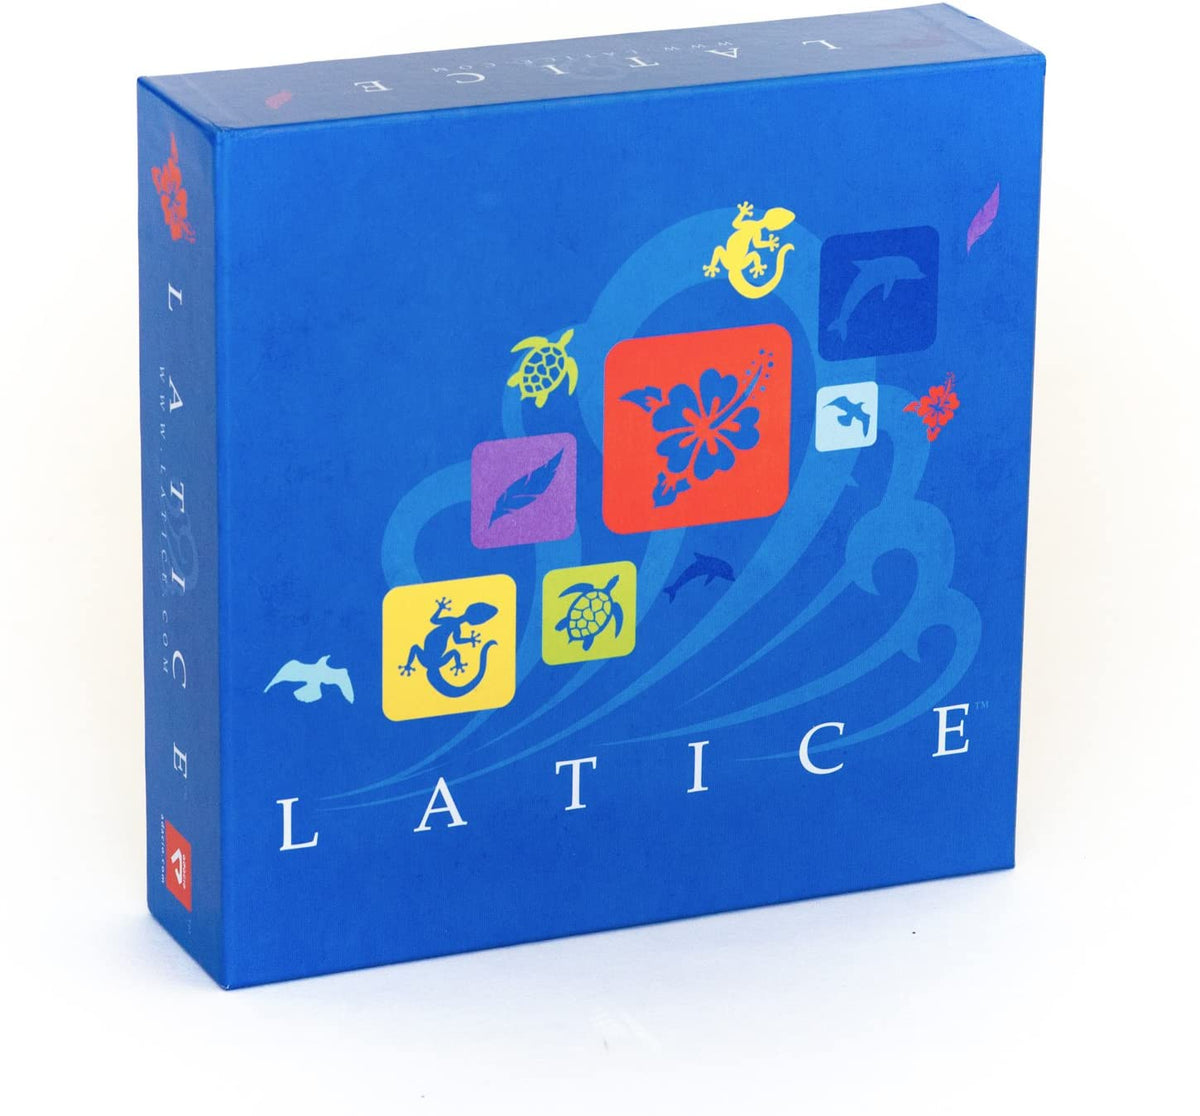 Latice Strategy Board Game - the Popular New Family Board Game for Kids and Adults, Challenging Fun for Everyone